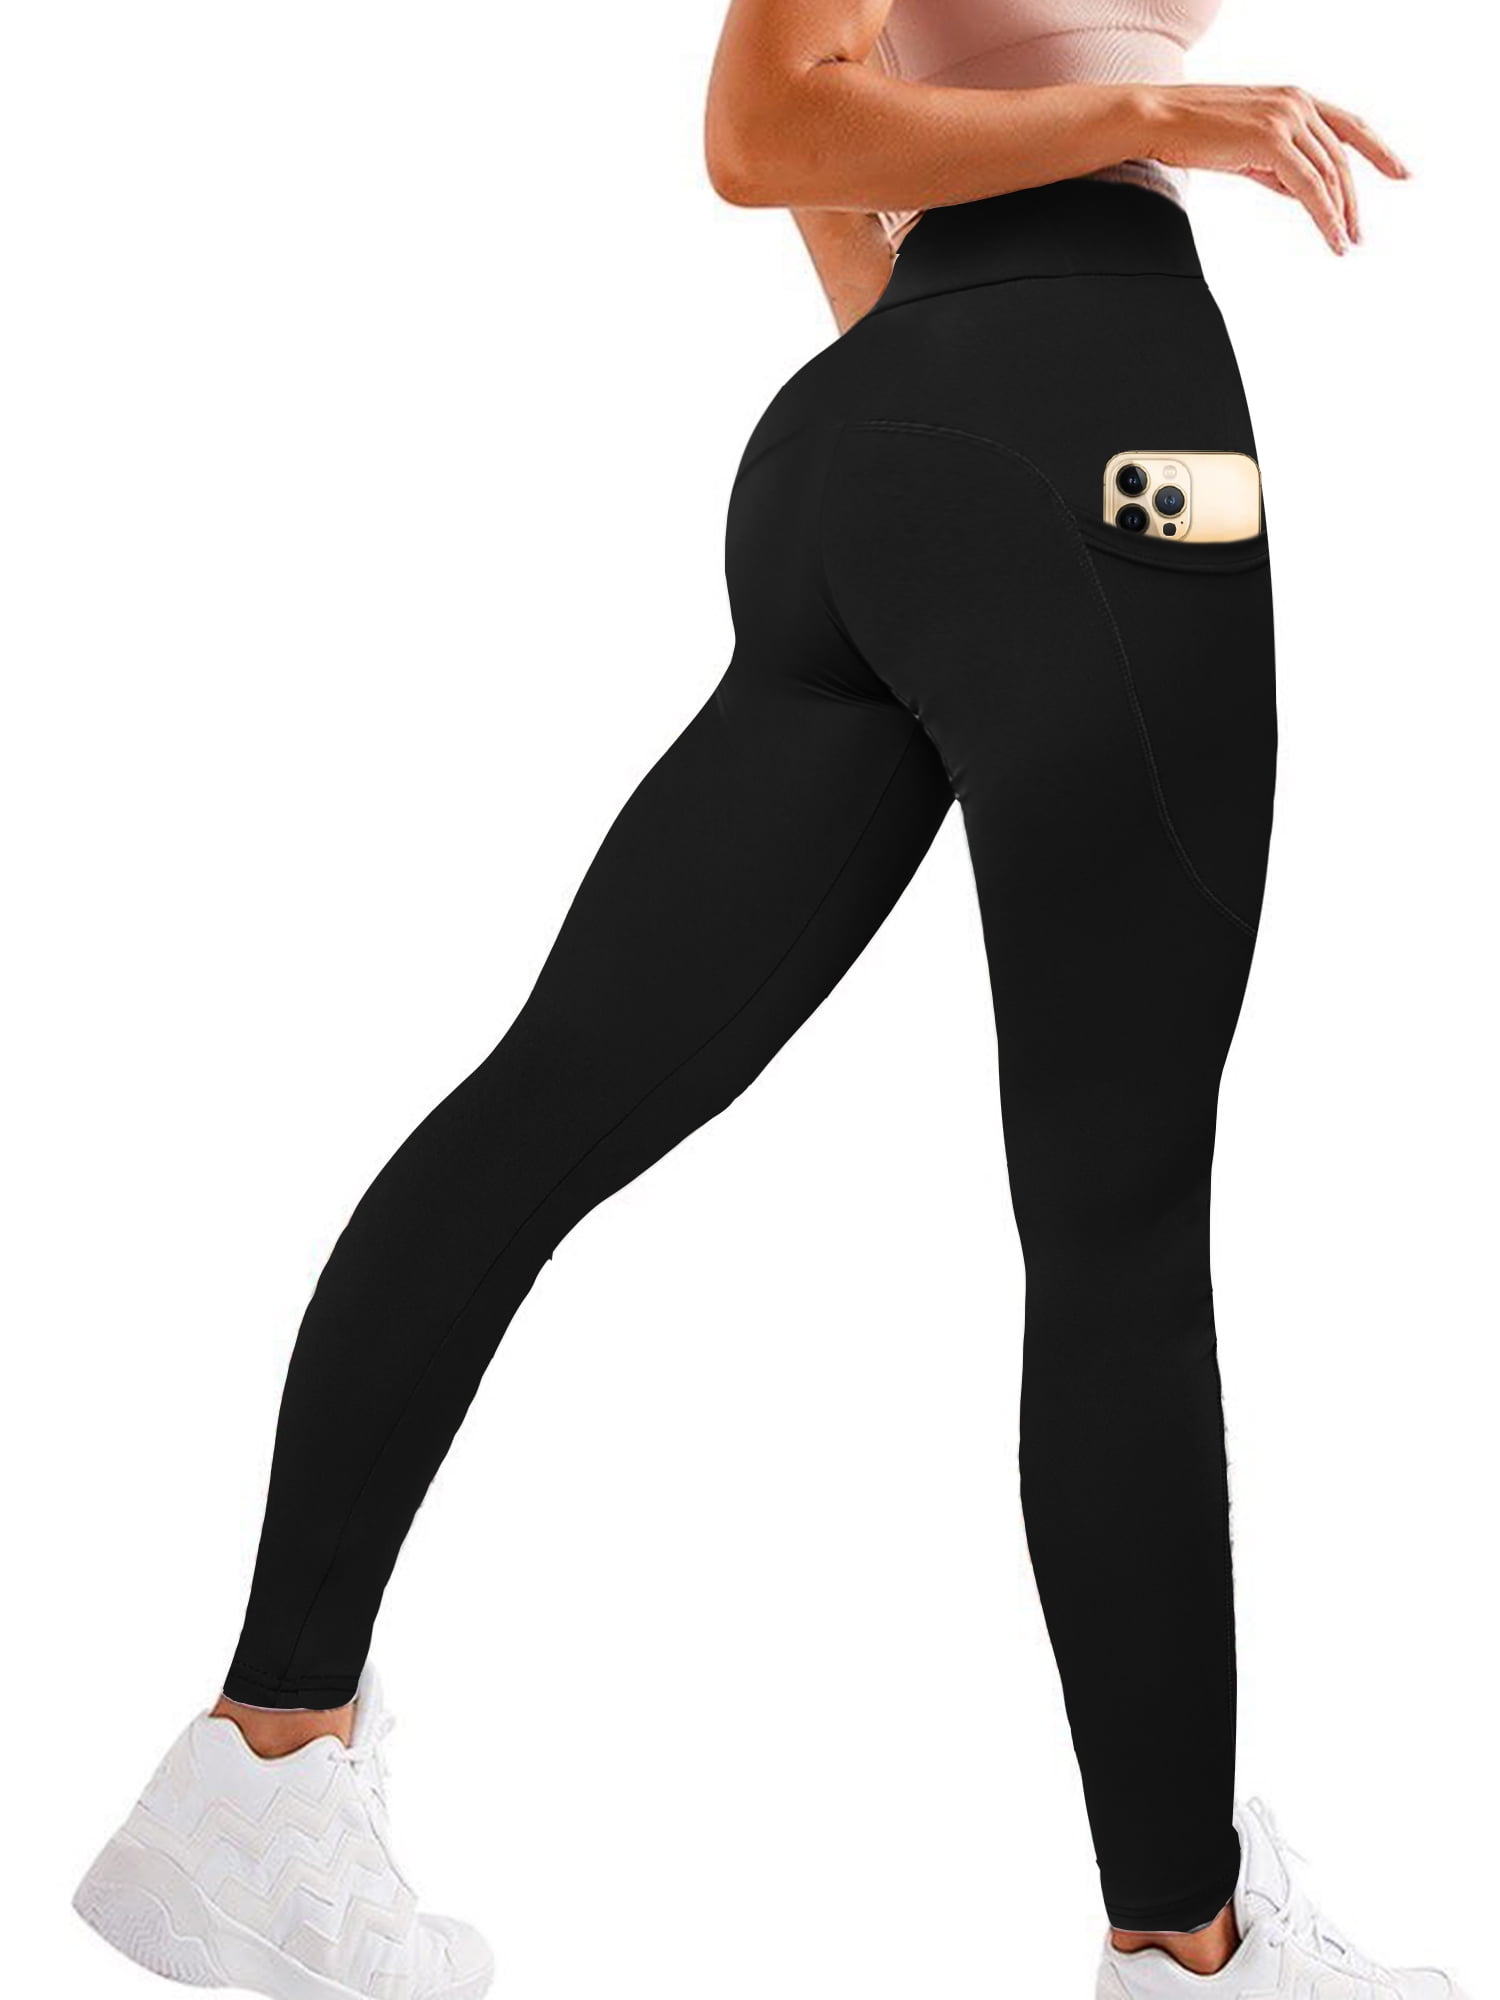 ACTIVE.WEAR Women Legging with Pockets,Girl Running Tight Pant,High Waist,Tummy Control,4 Way Stretch,Non See-Through